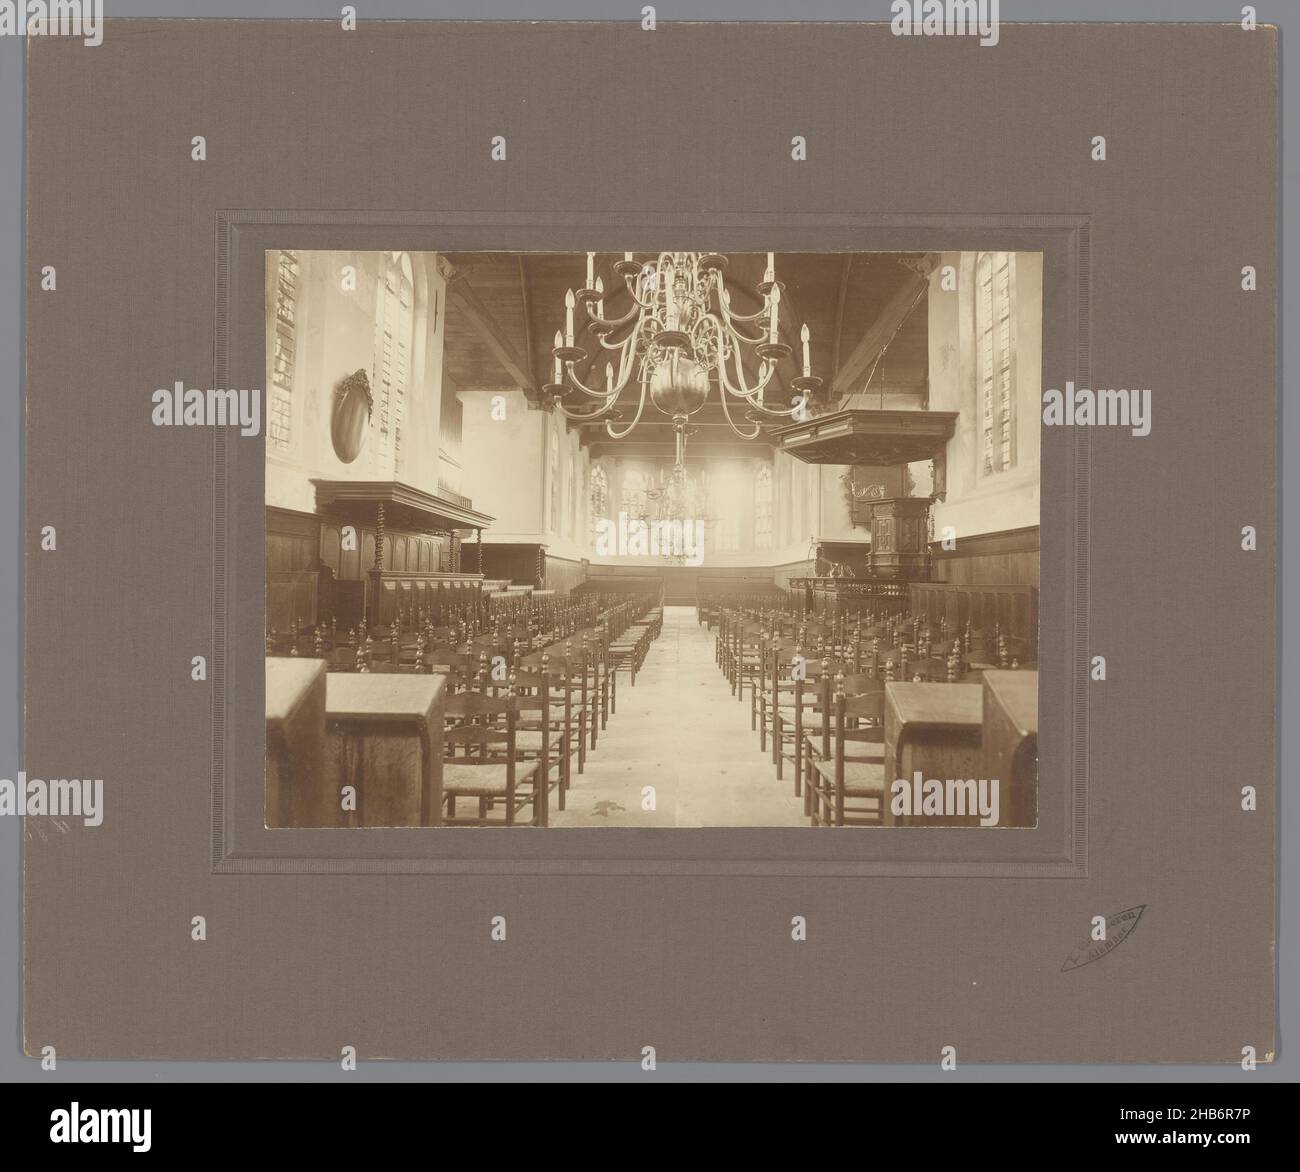 Interior of the Dutch Reformed Church in De Rijp, North Holland, Interior of the Dutch Reformed Church in De Rijp, North Holland. Wooden ceiling, two large chandeliers and chairs., Leonard Vlaanderen (mentioned on object), Alkmaar, 1923, photographic support, cardboard, gelatin silver print, height 167 mm, width 225 mmheight 299 mm, width 361 mm Stock Photo